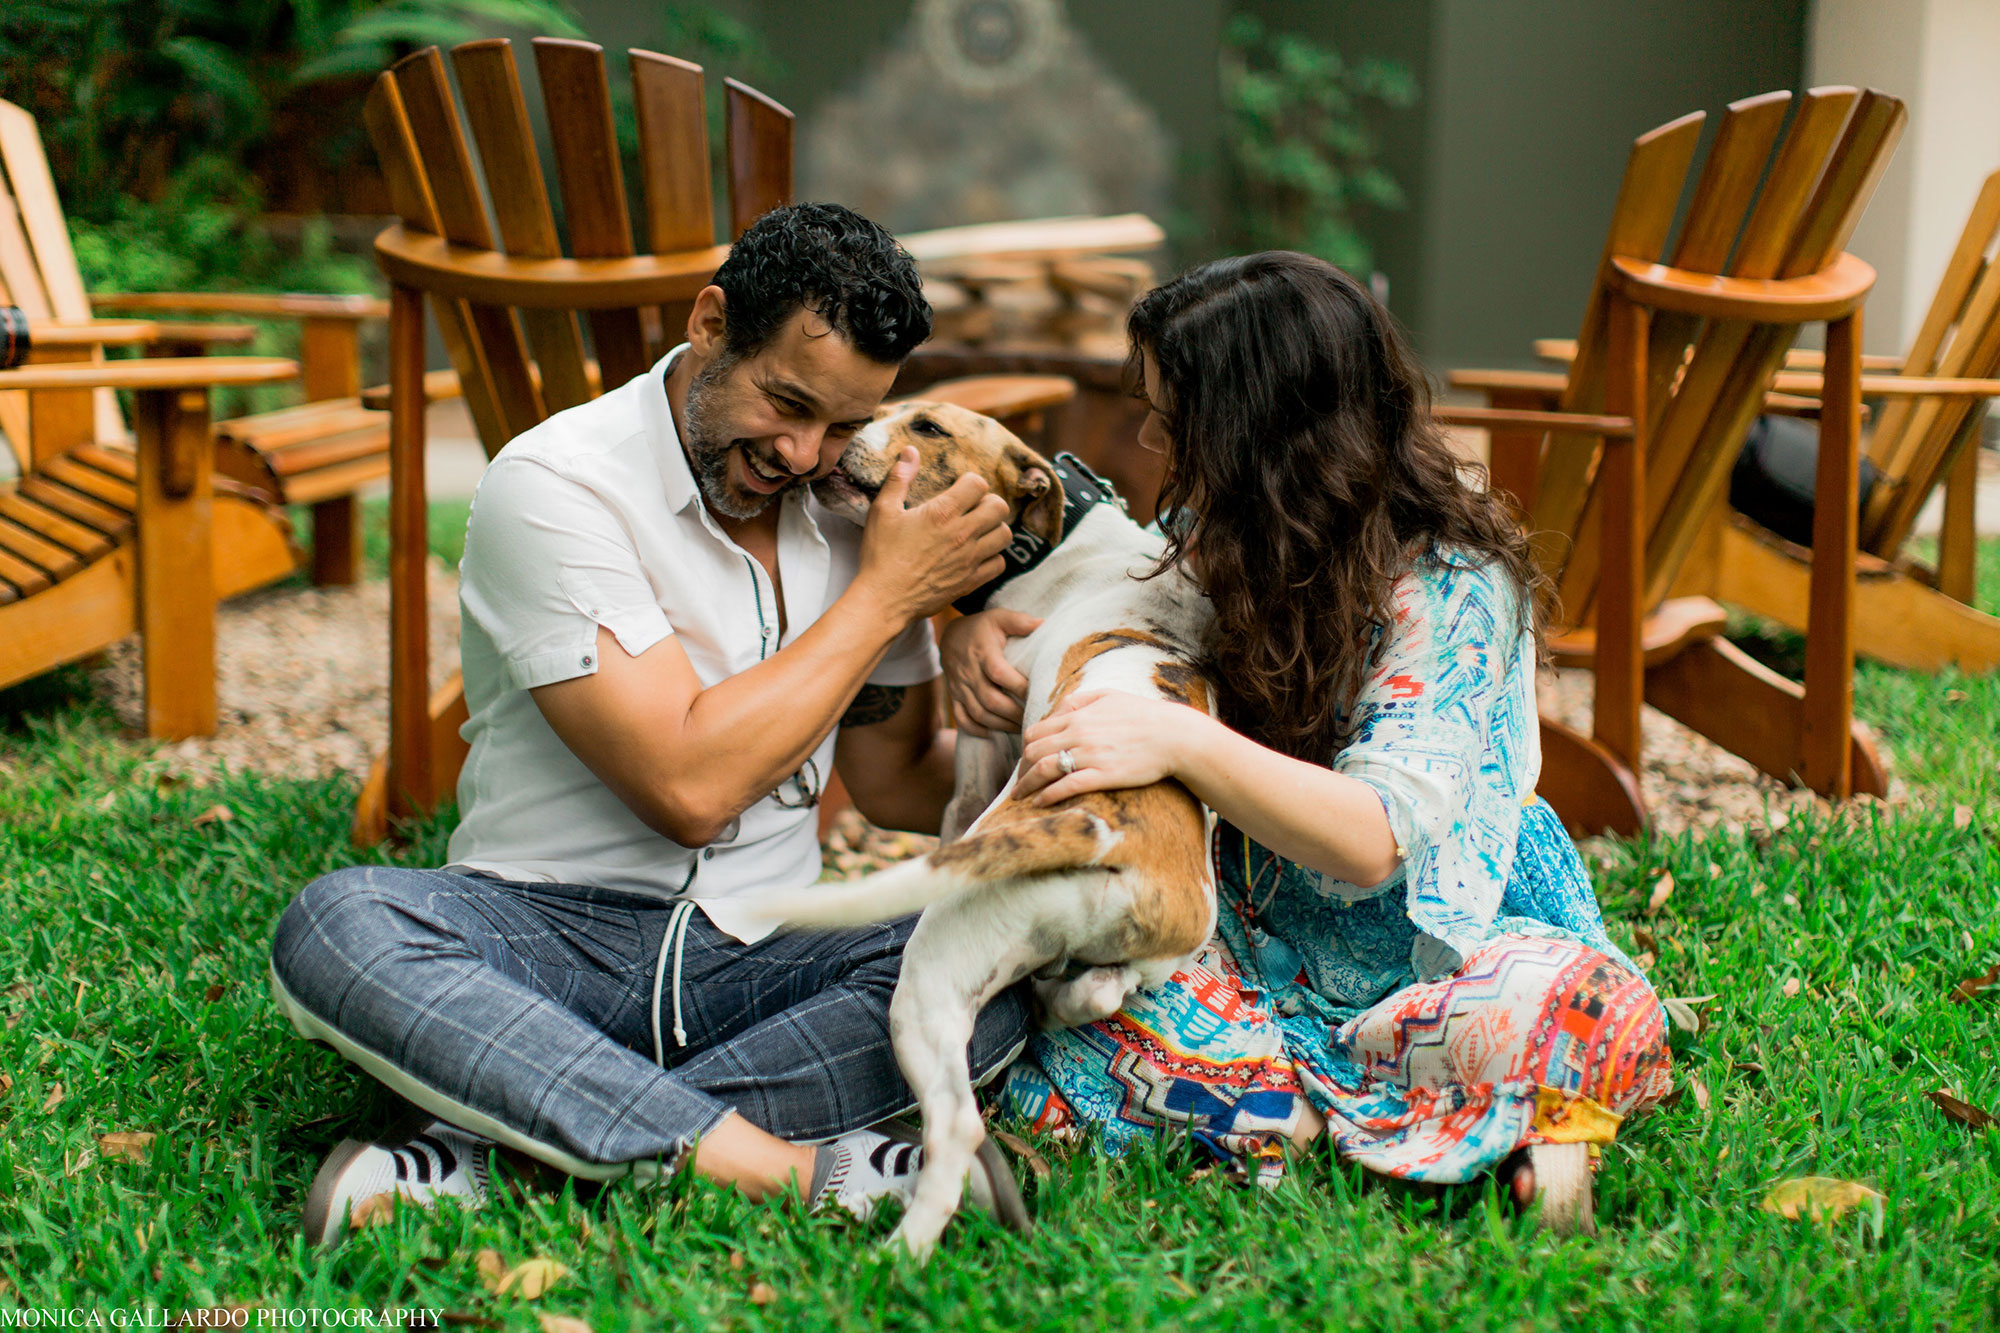 This Is Us Jon Huertas Takes Us Along on His Belize Vacation